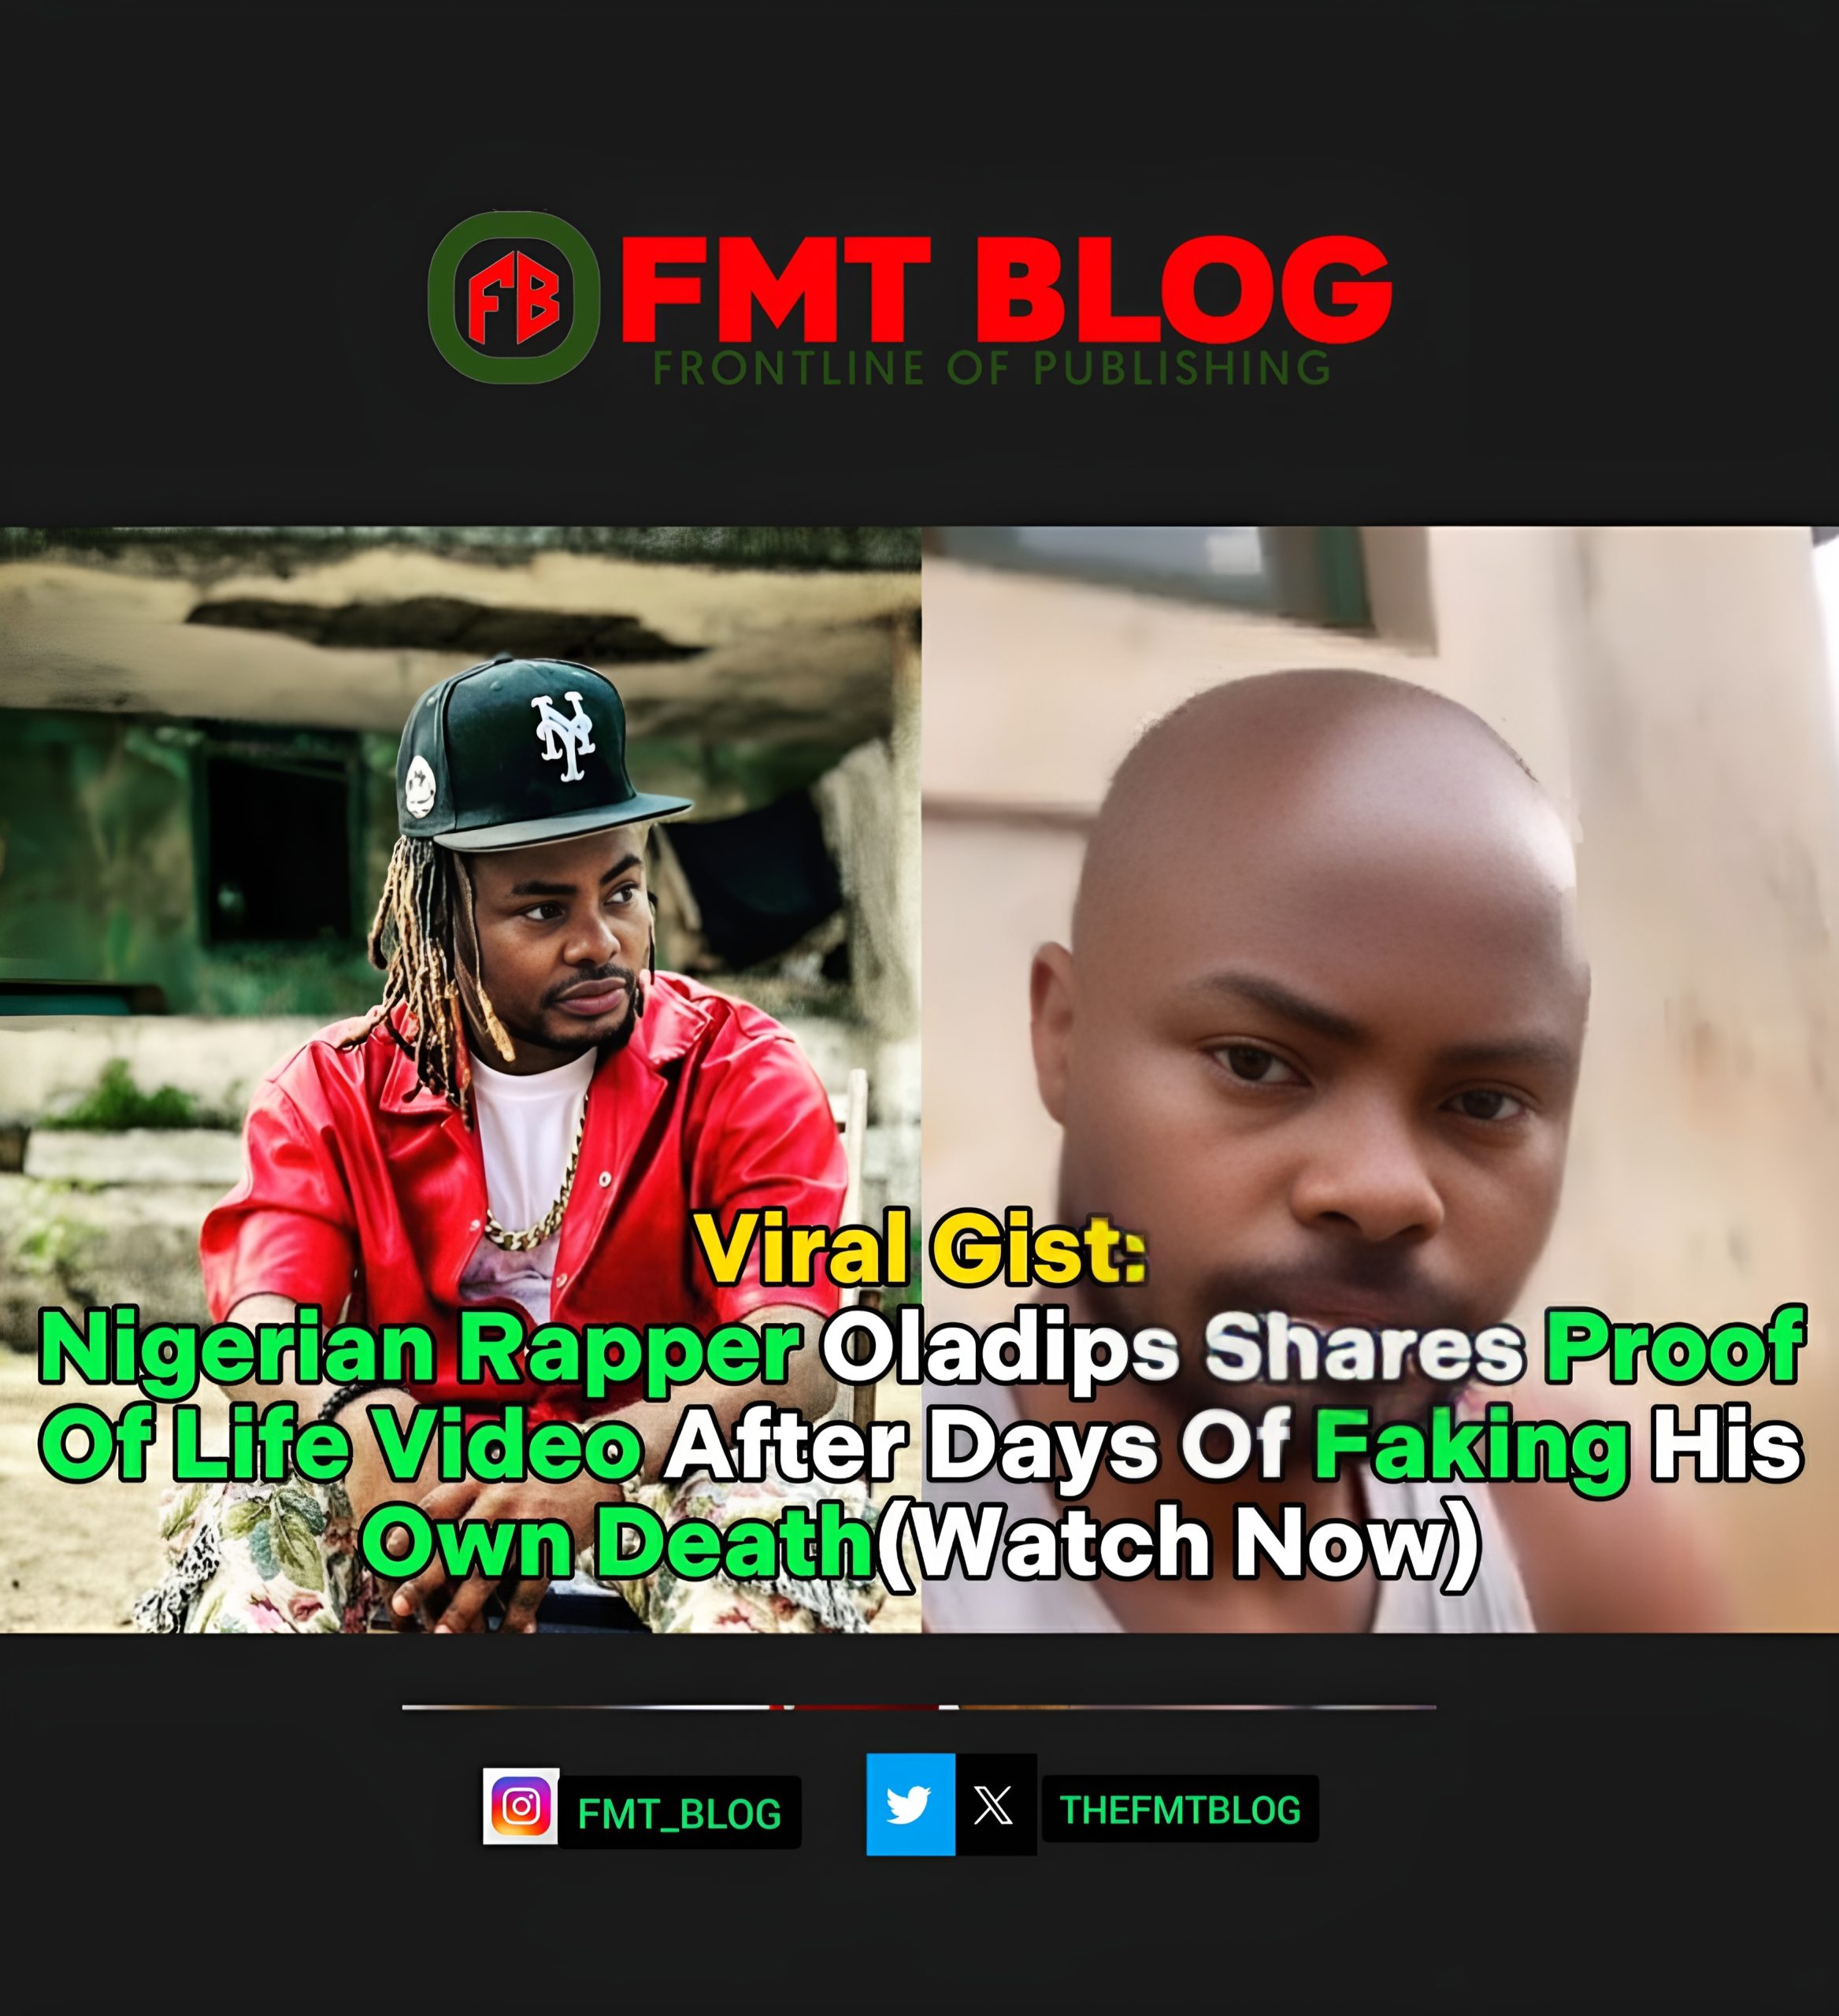 Nigerian Rapper Oladips Shares Proof Of Life Video After Days Of Faking His Own Death (Watch Now)